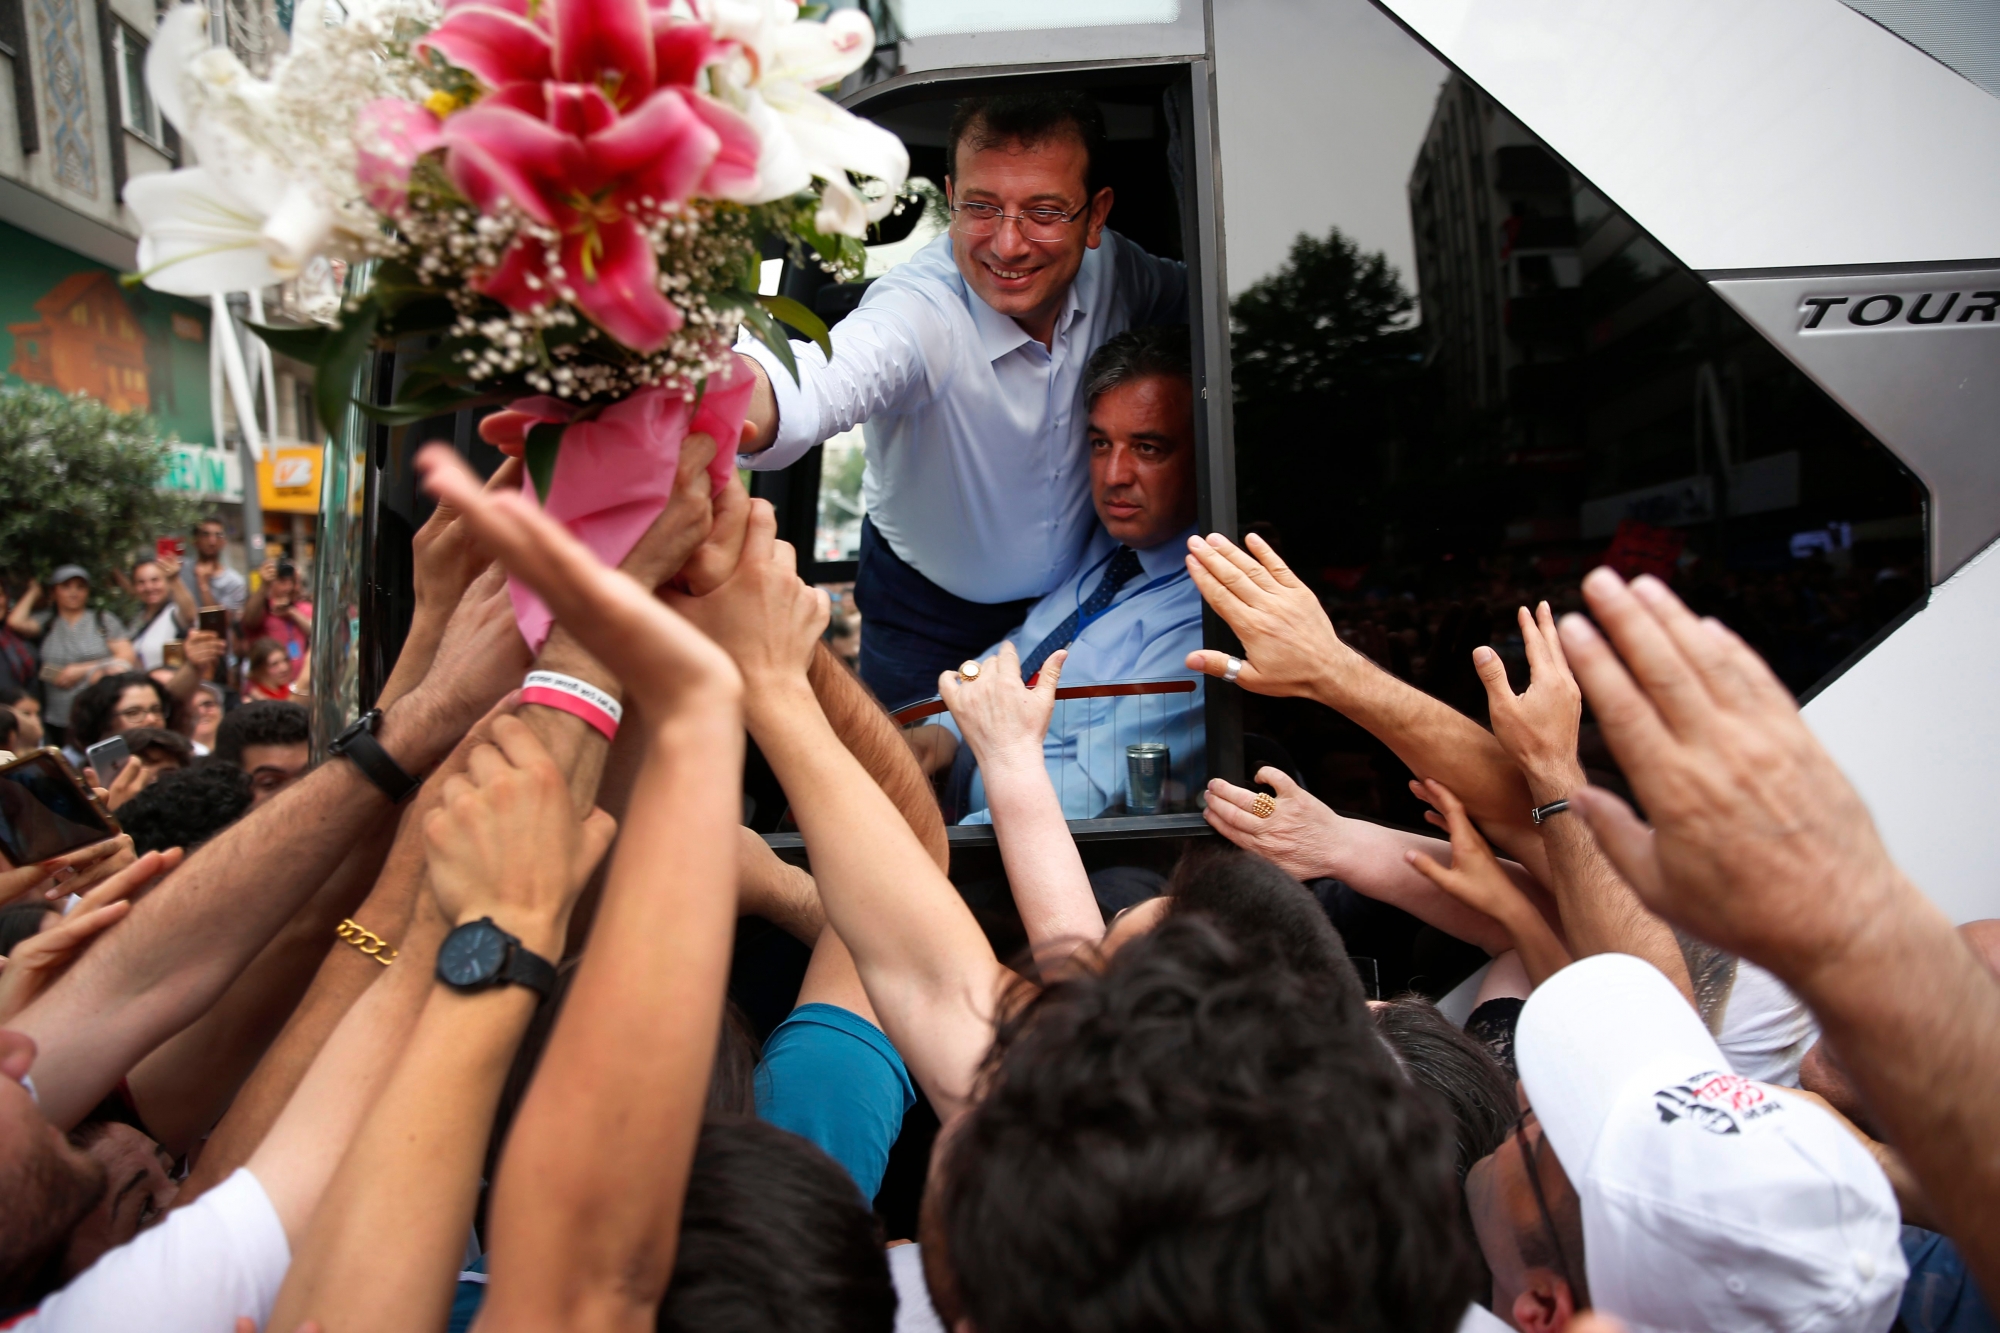 Ekrem Imamoglu, candidate of the secular opposition Republican People's Party, or CHP, reaches out from his campaign bus to supporters after a rally in Istanbul, Wednesday, June 19, 2019, ahead of June 23 re-run of Istanbul elections. The 49-year-old candidate won the March 31 local elections with a slim majority, but after weeks of recounting requested by the ruling party, Turkey's electoral authority annulled the result of the vote, revoked his mandate and ordered the new election. (AP Photo/Lefteris Pitarakis) APTOPIX Turkey Local Elections